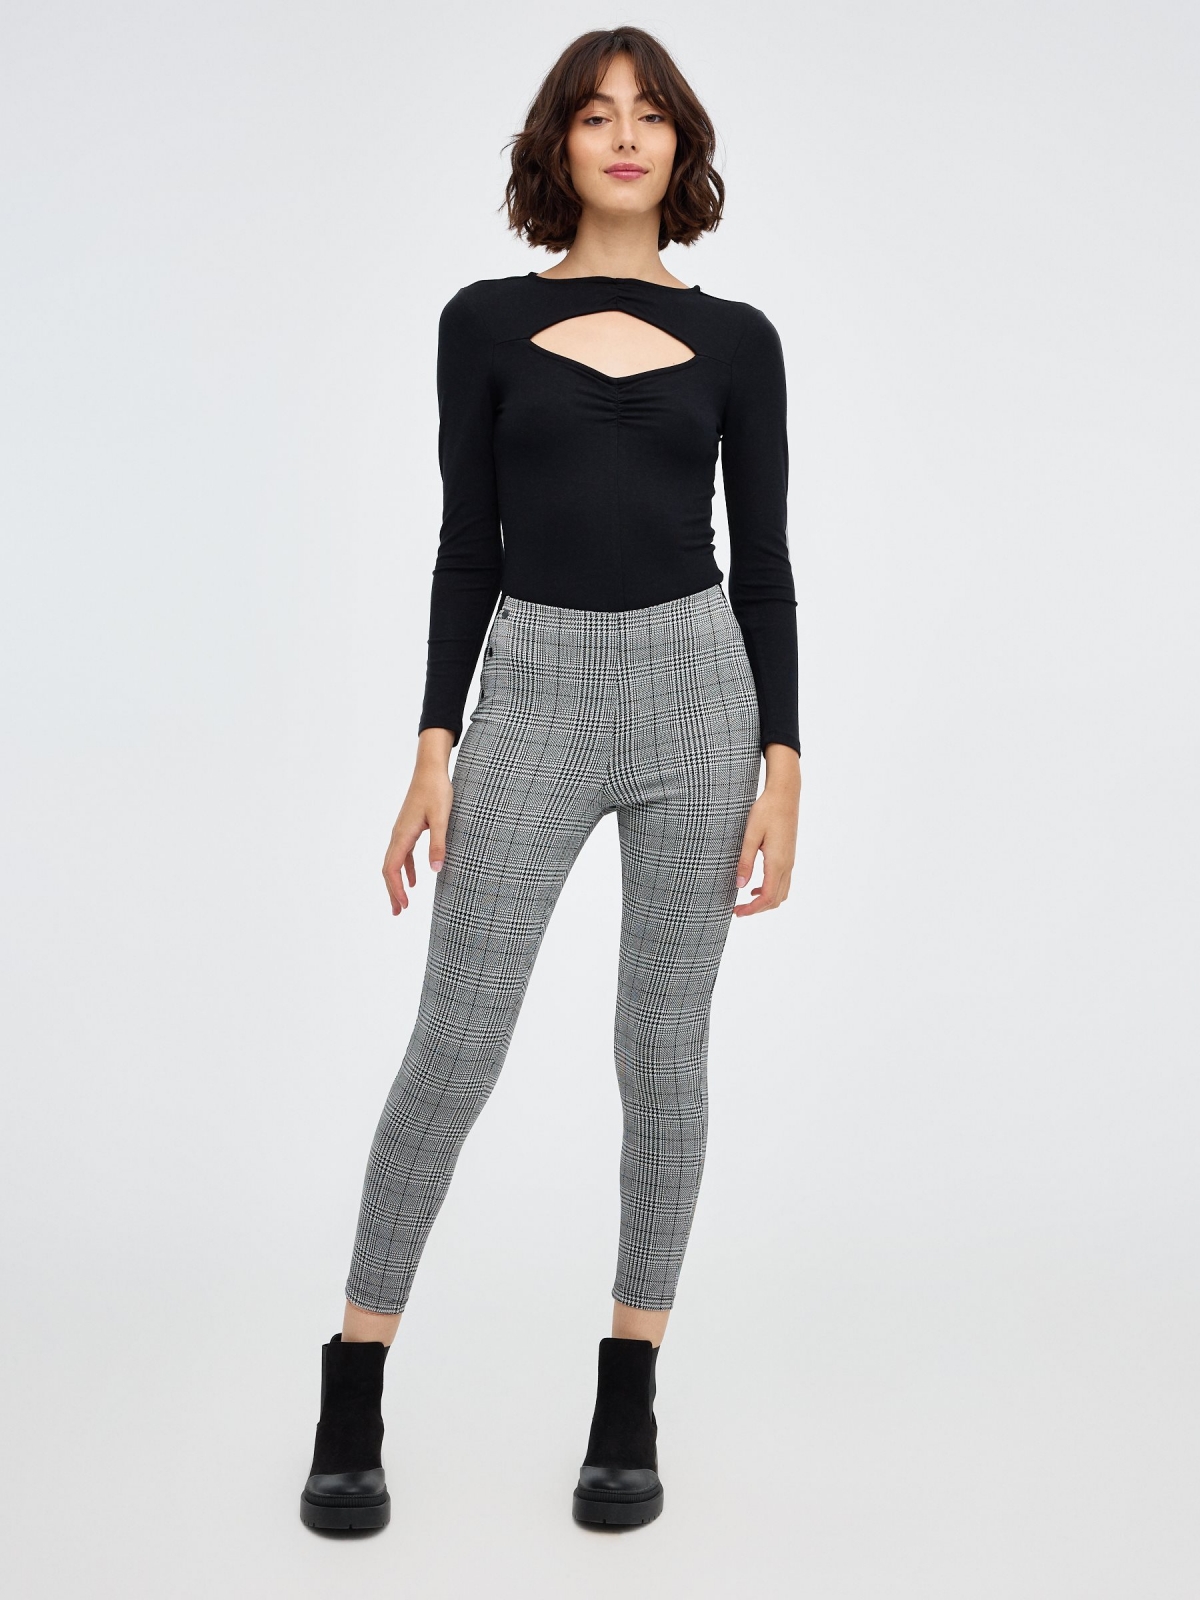 Superskinny checkered leggings black front view